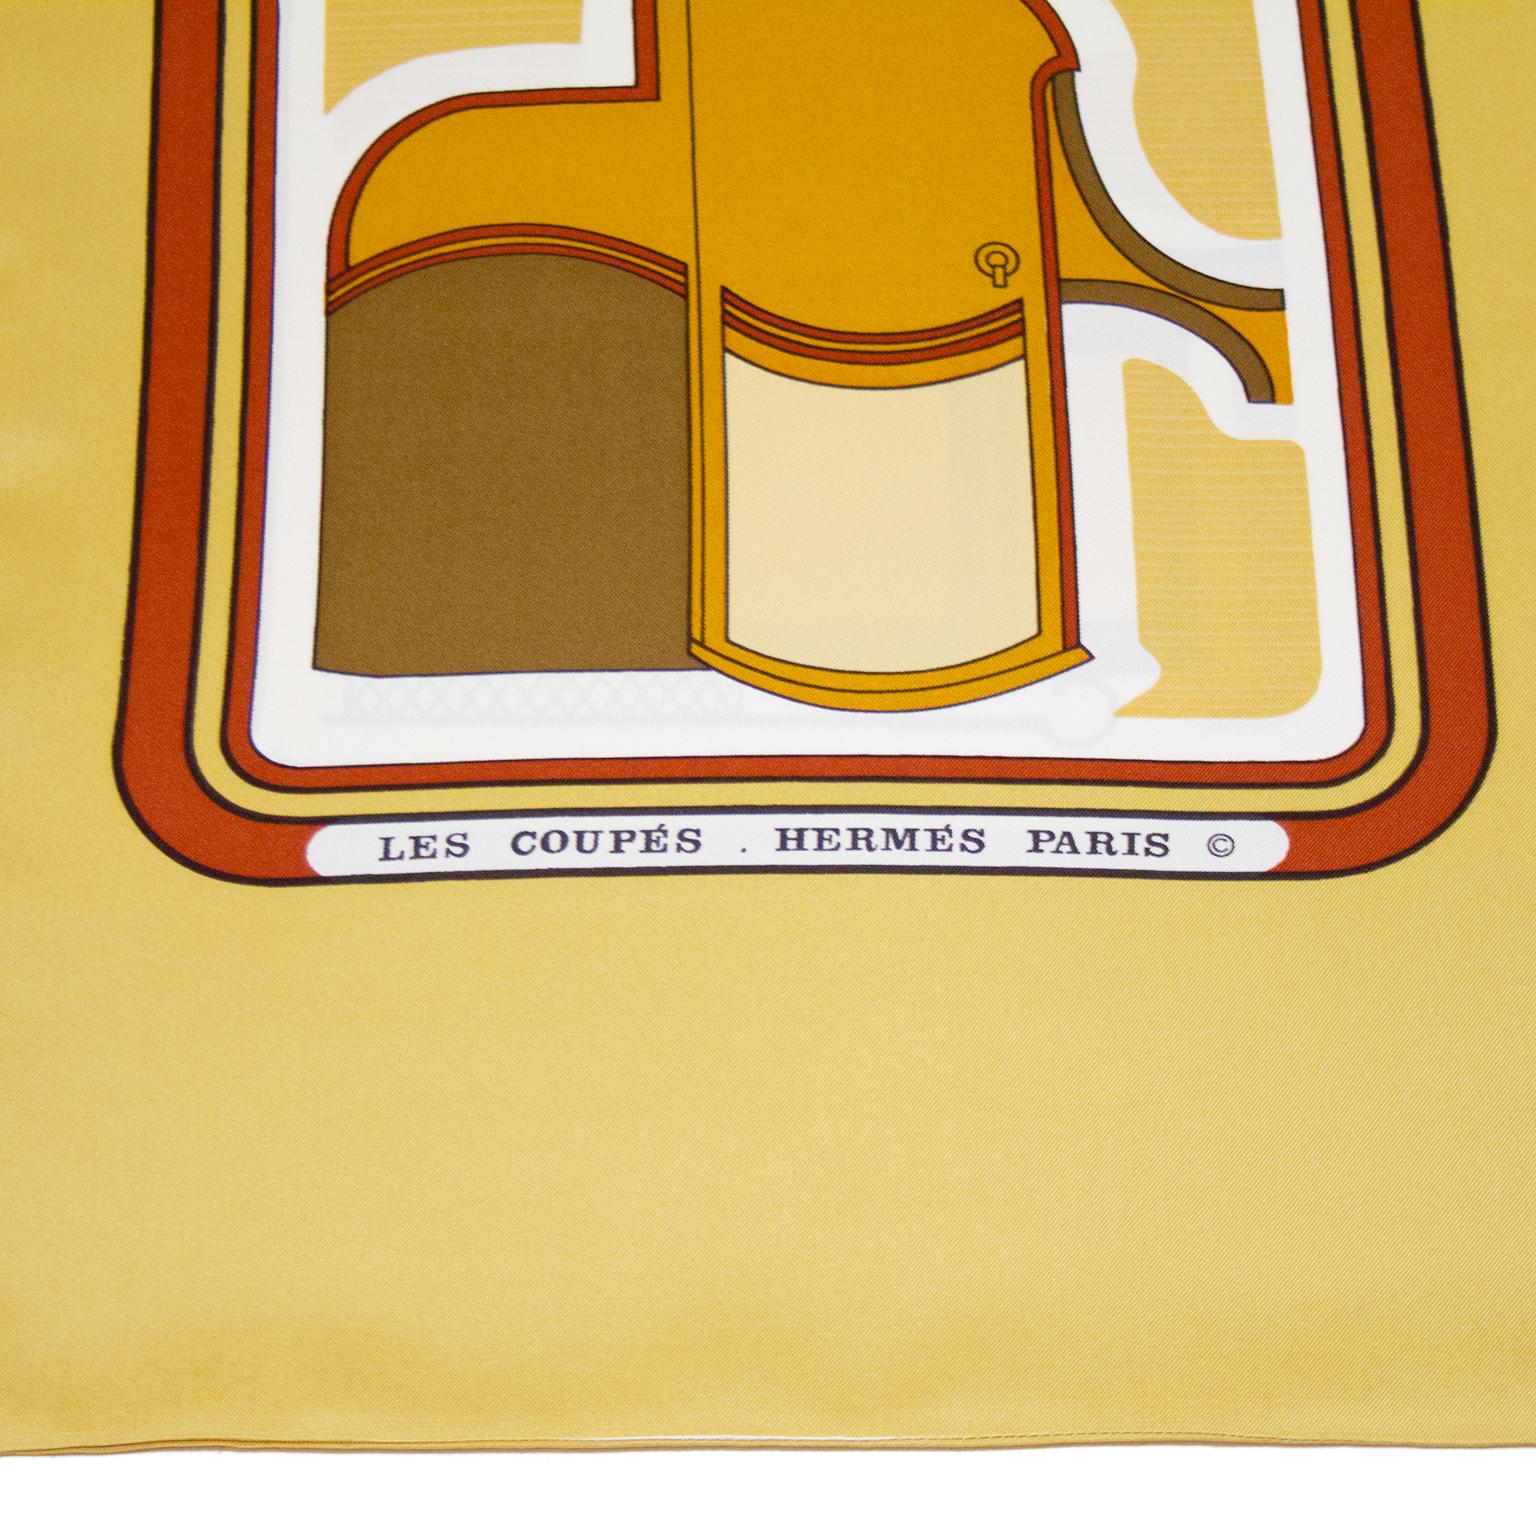 1970s Hermes 'Les Coupes' Biege Silk Scarf  In Good Condition For Sale In Toronto, Ontario